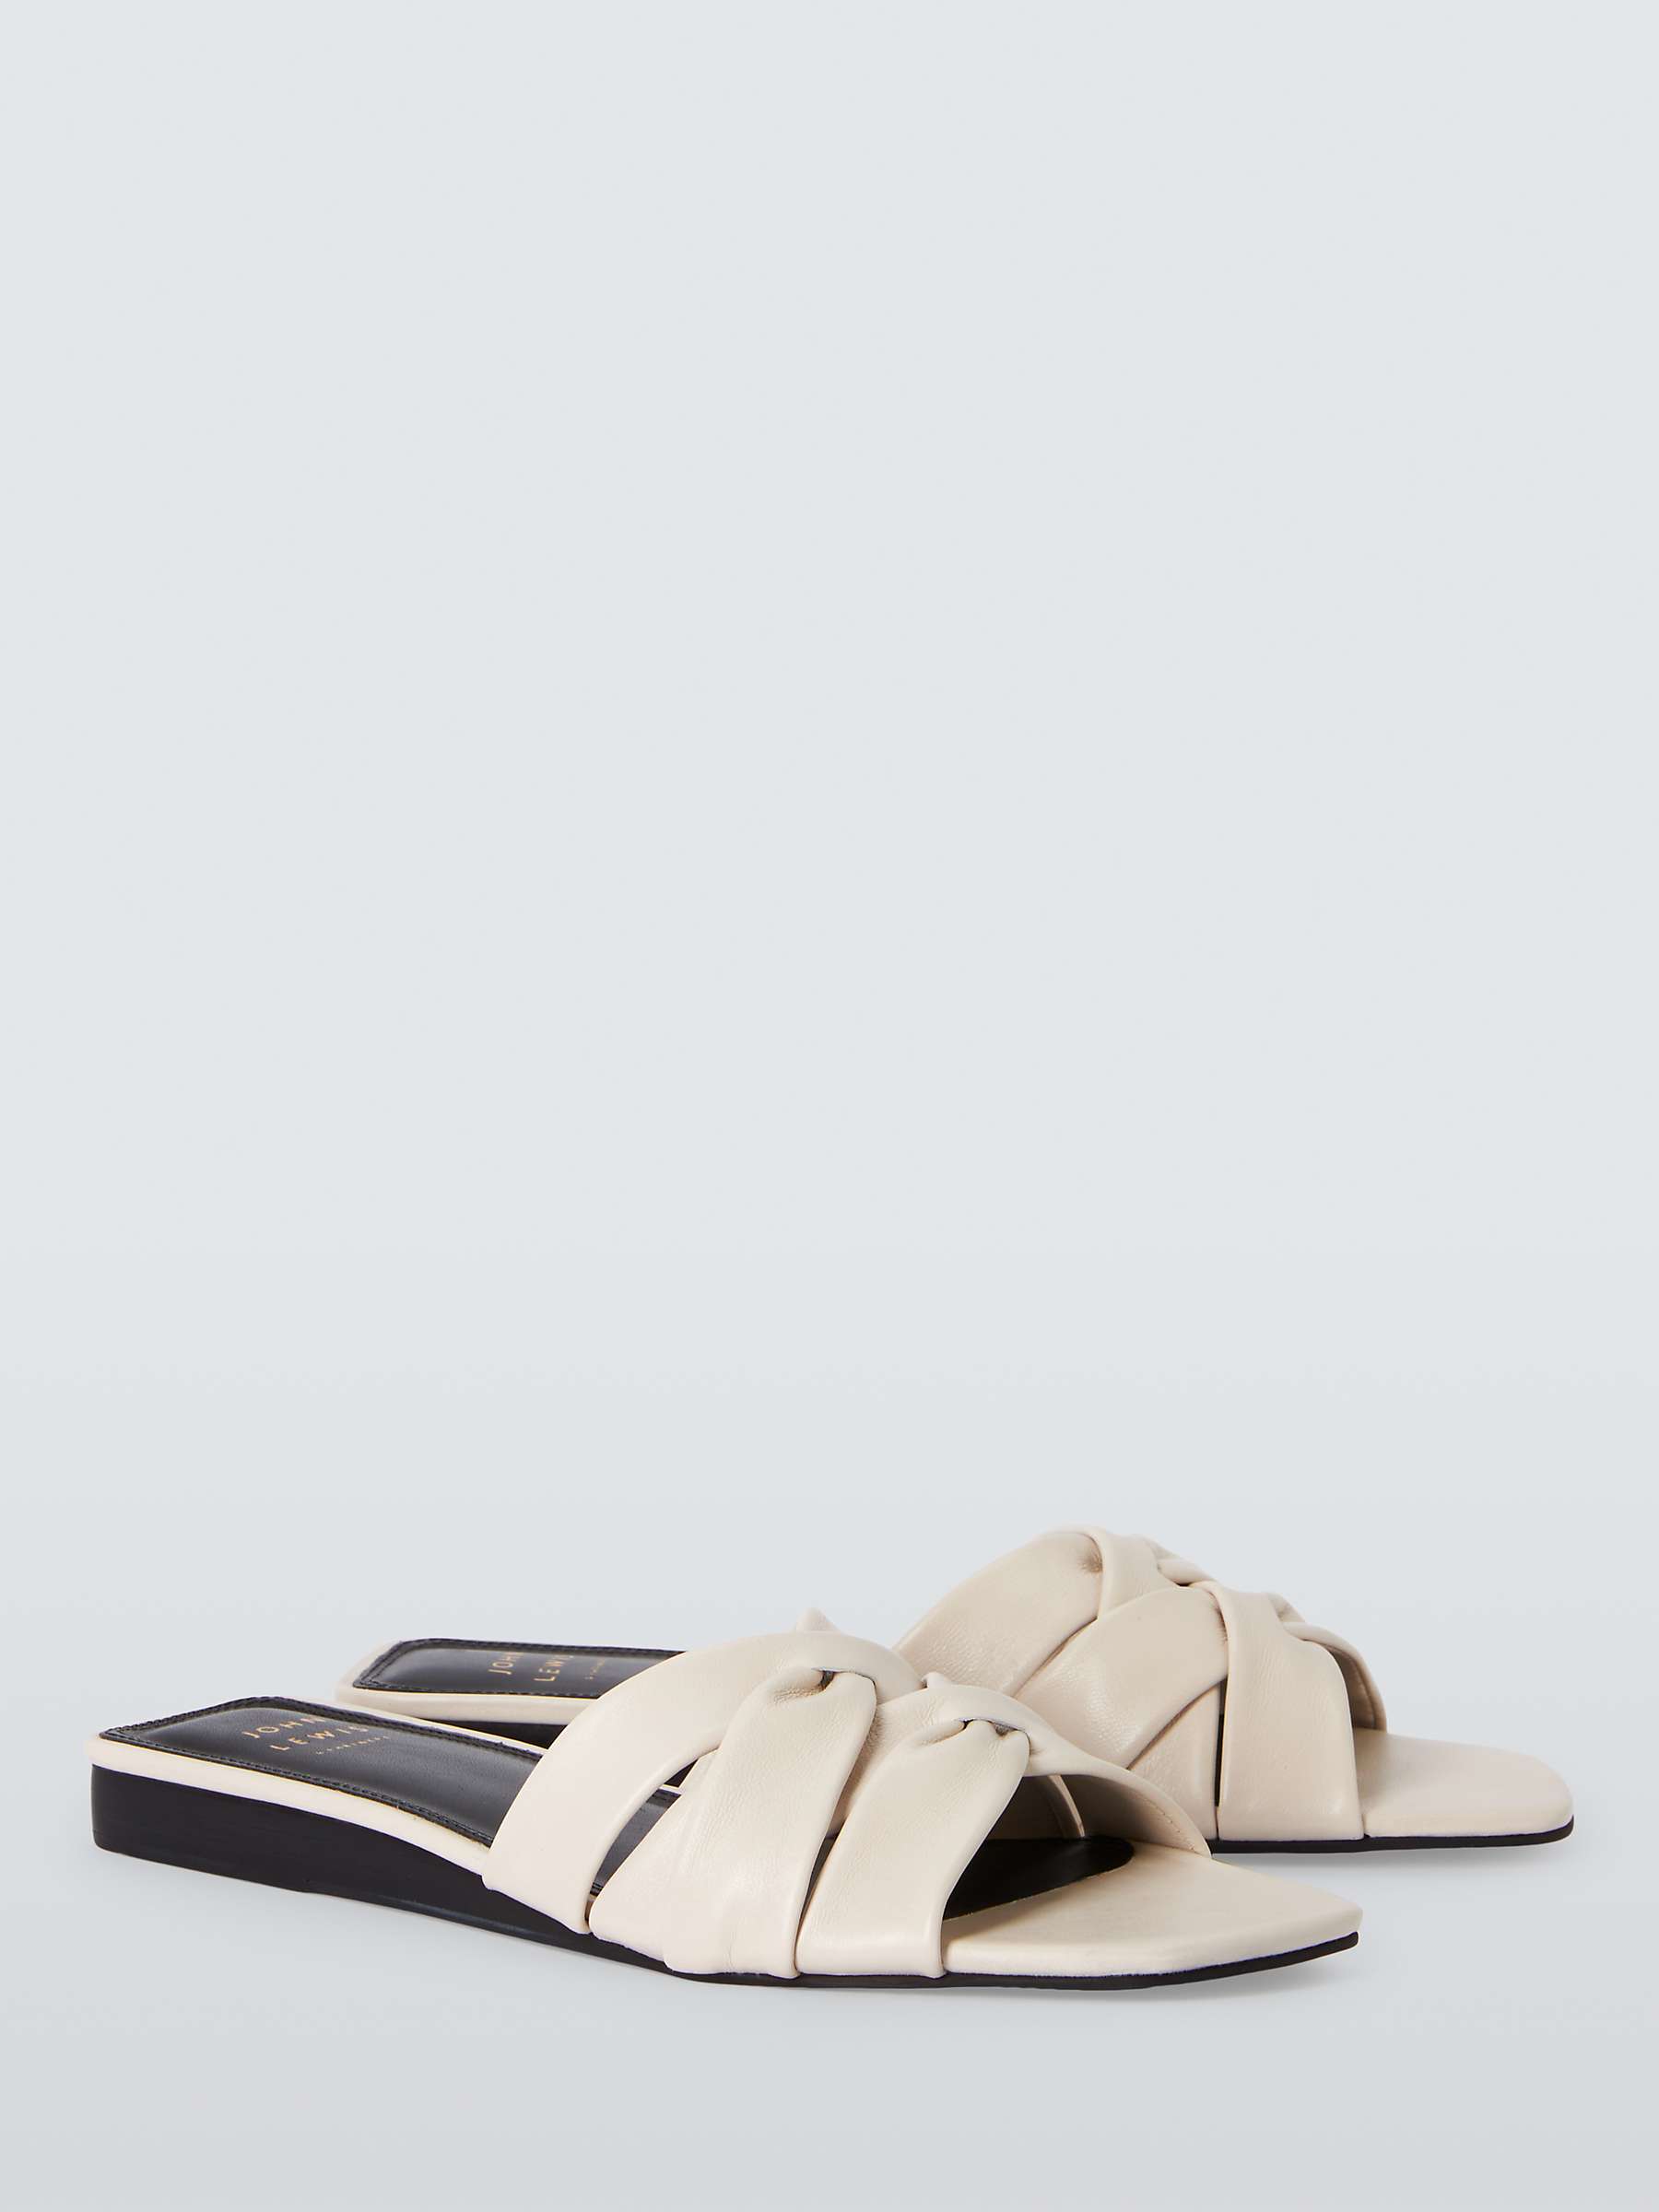 Buy John Lewis Lopez Leather Ruched Interwoven Mule Sandals Online at johnlewis.com